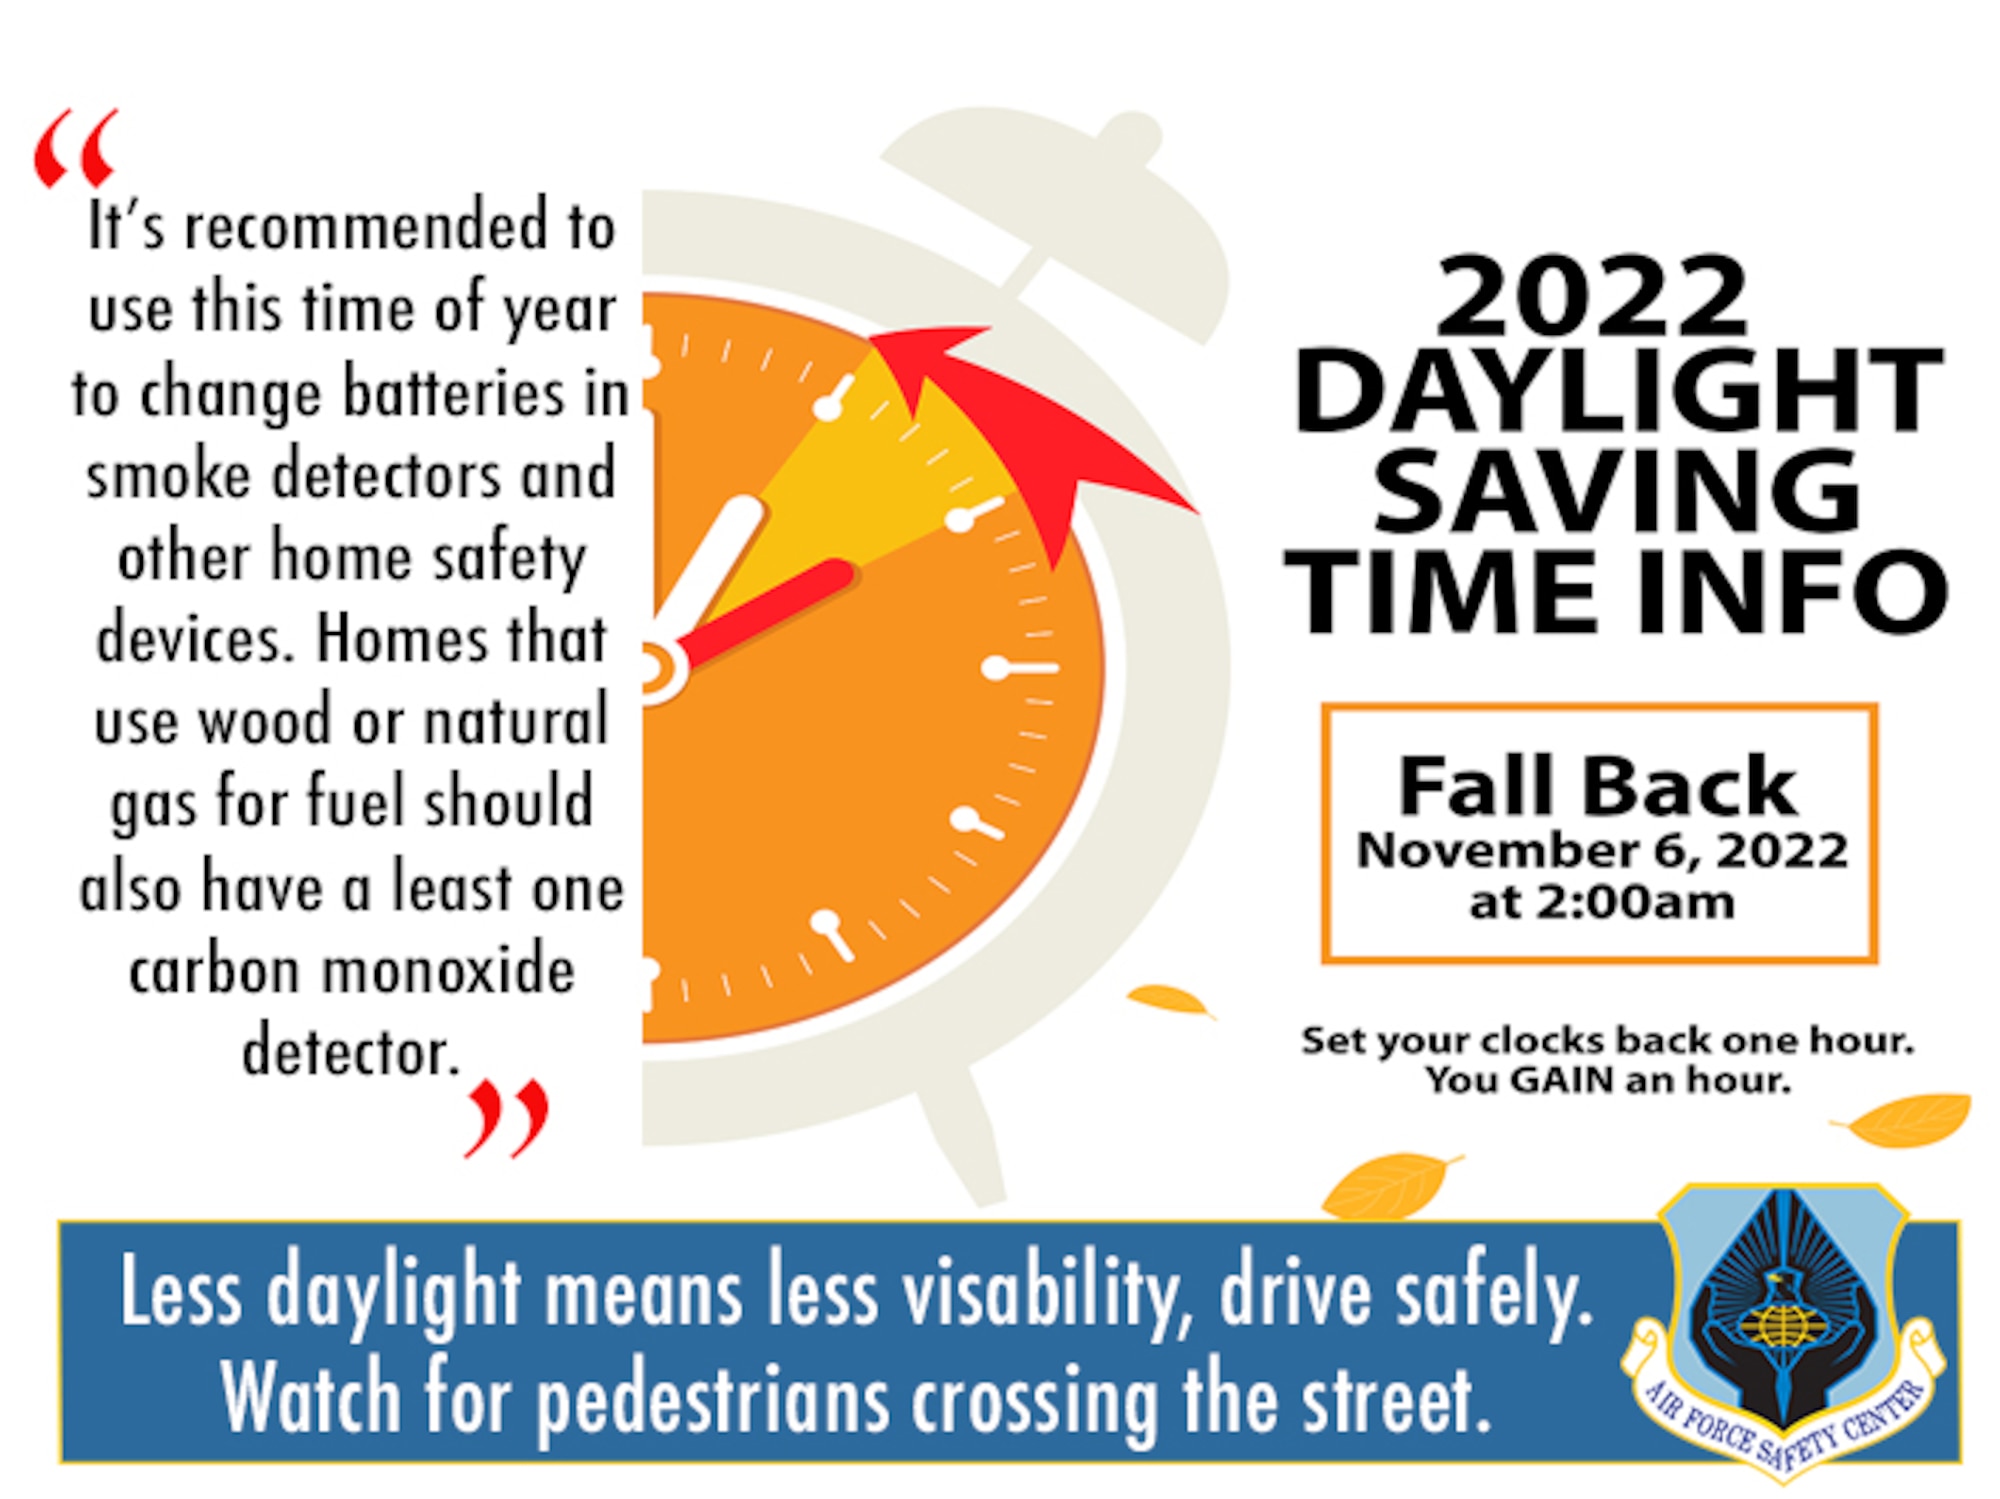 FAQs: How Does Daylight Savings work? Do We Gain or Lose and Hour?